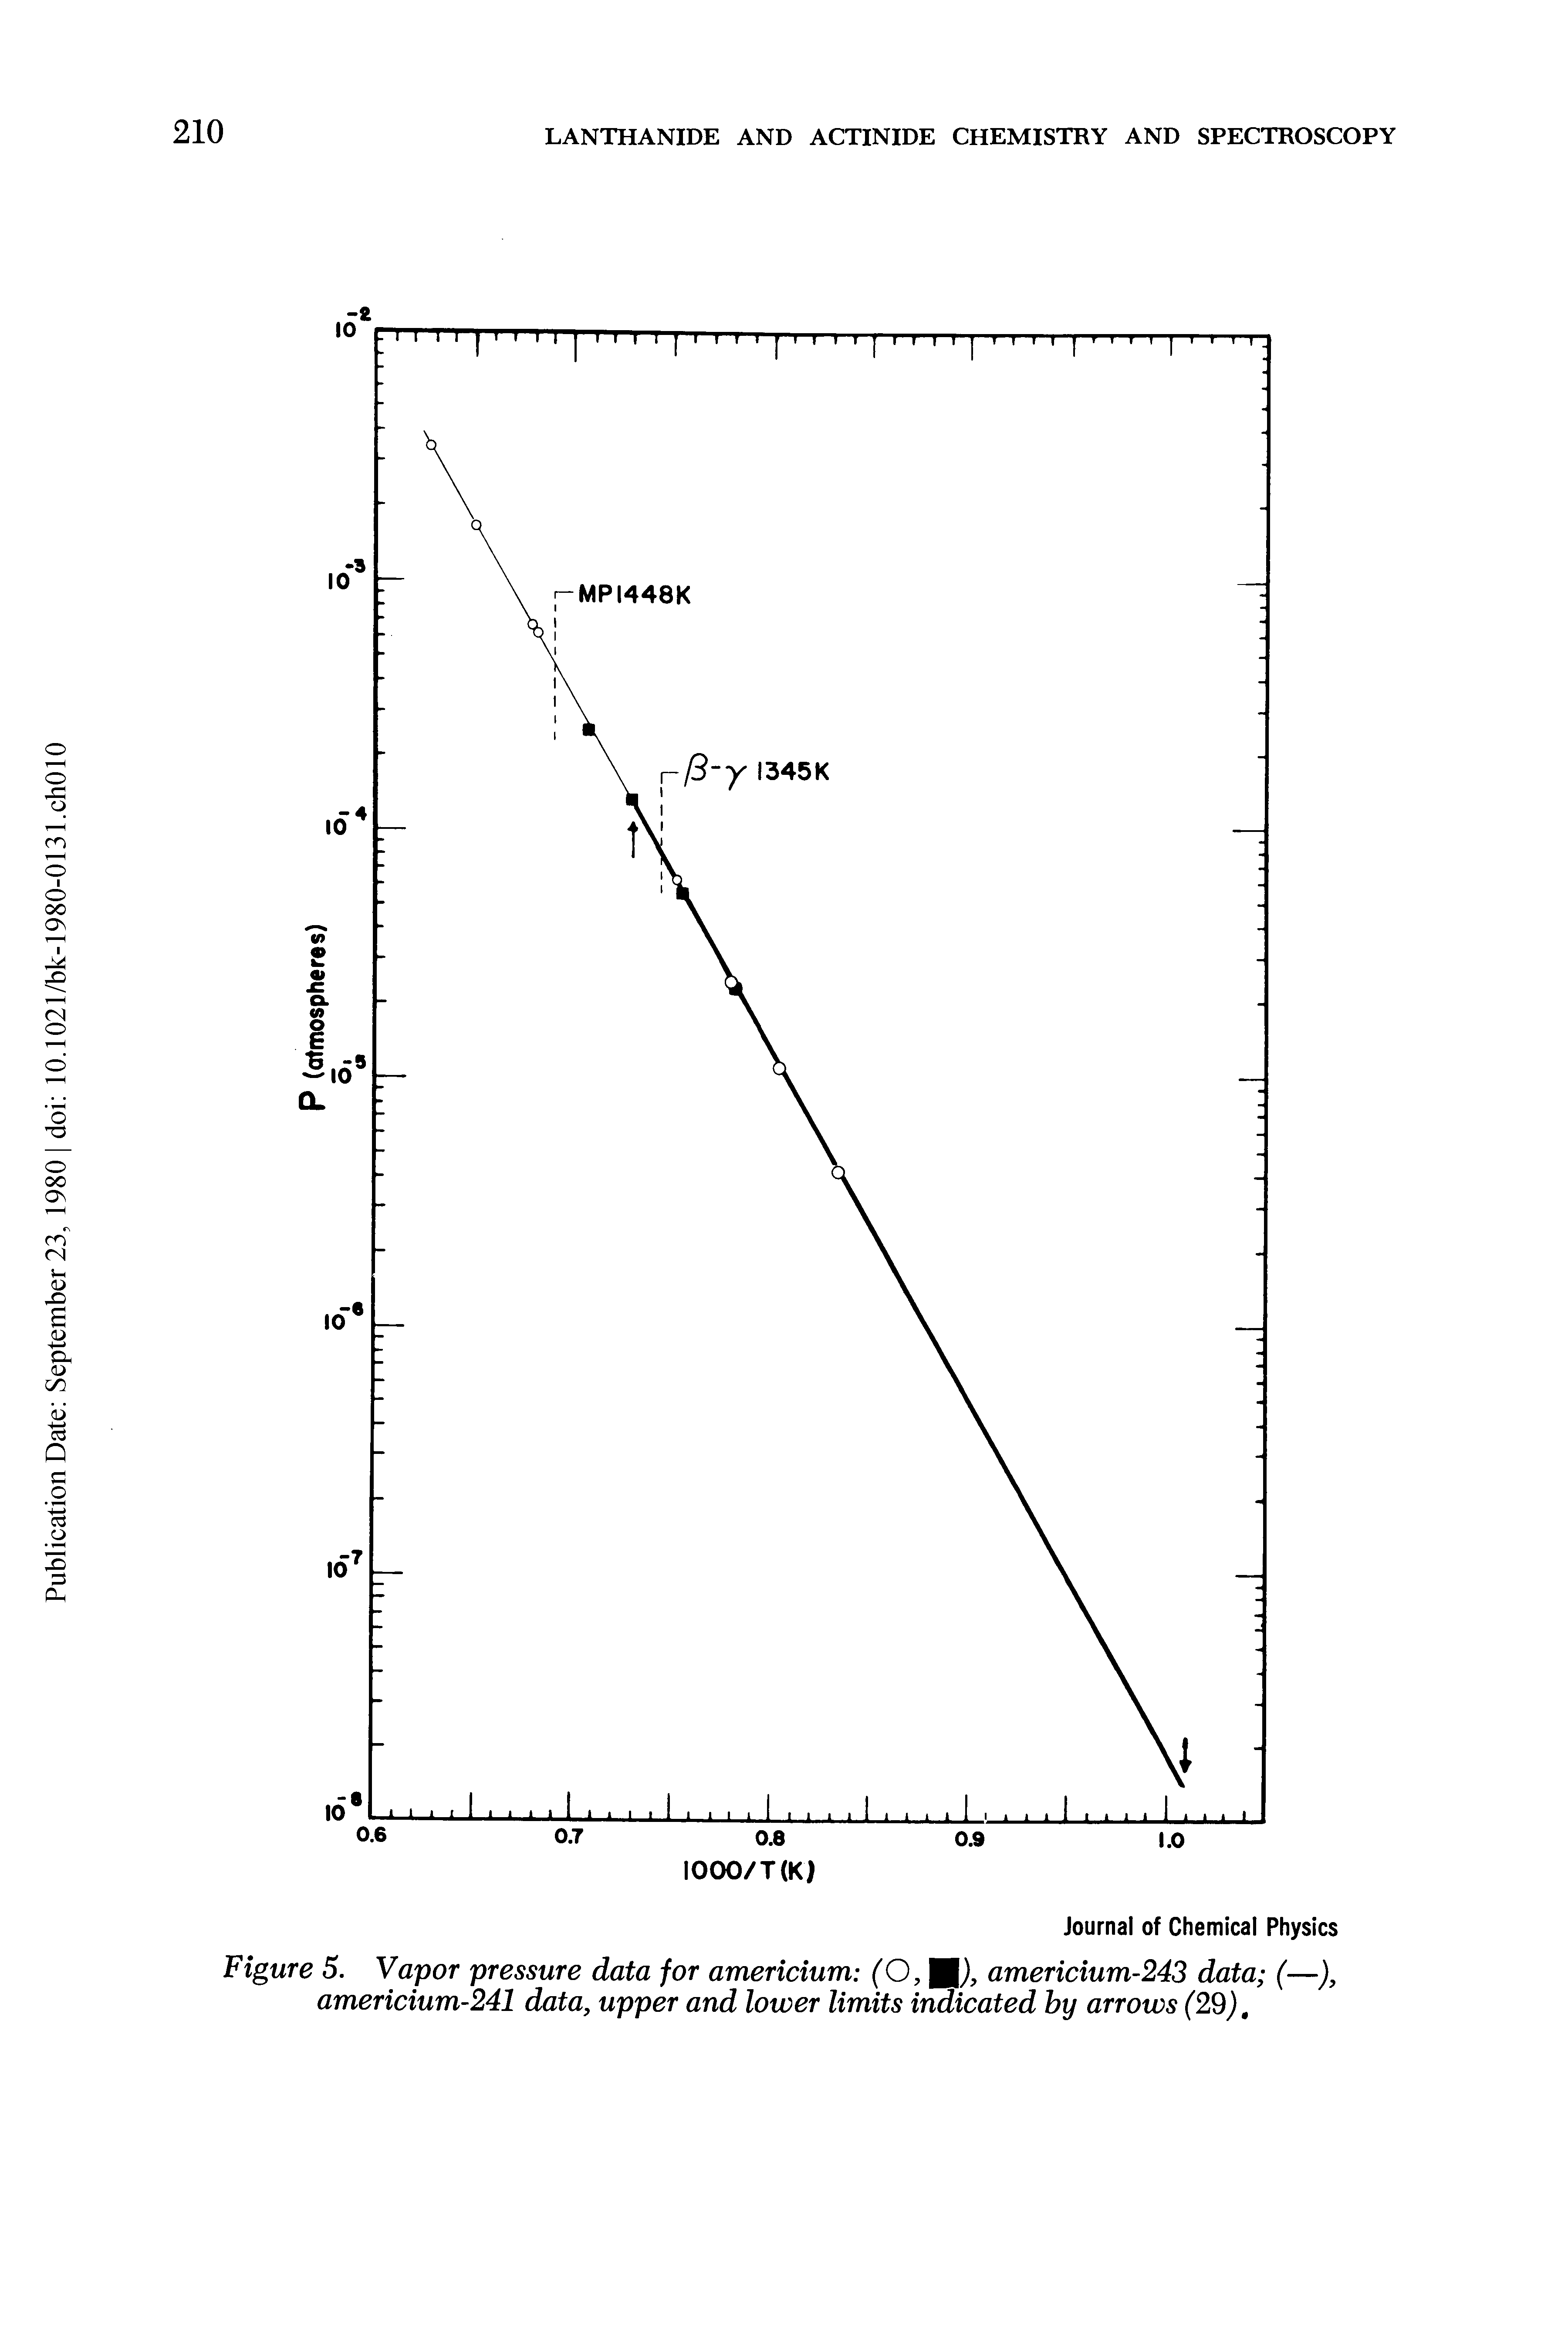 Figure 5. Vapor pressure data for americium (O, D, americium-243 data (—), americium-241 data, upper and lower limits indicated by arrows (29),...